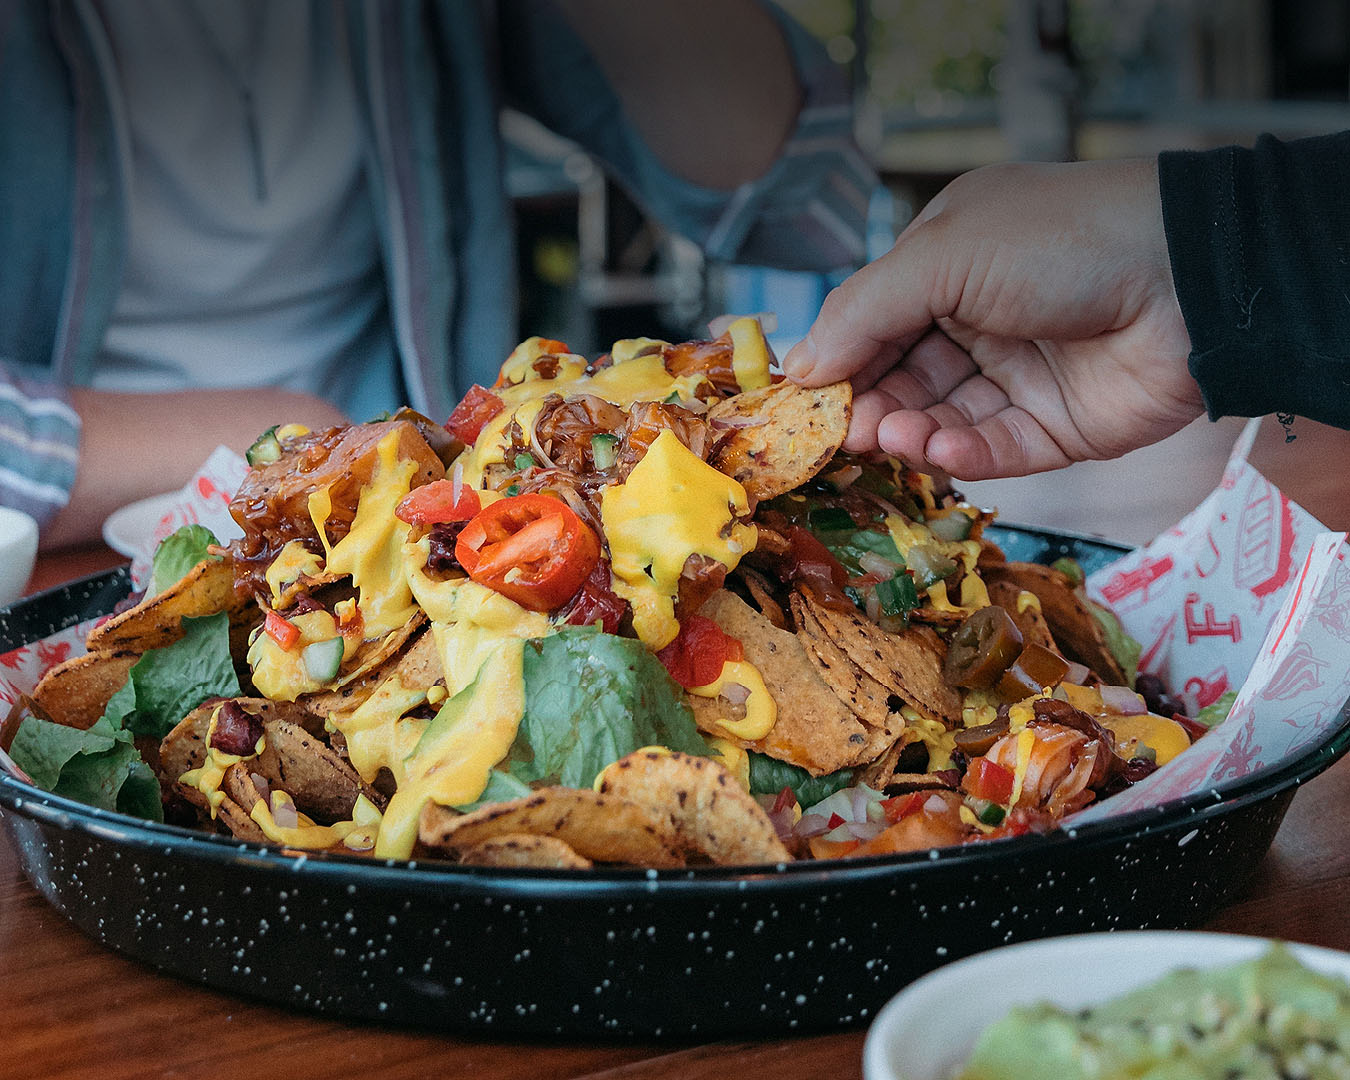 Someone digs into a pile of bottomless nachos.